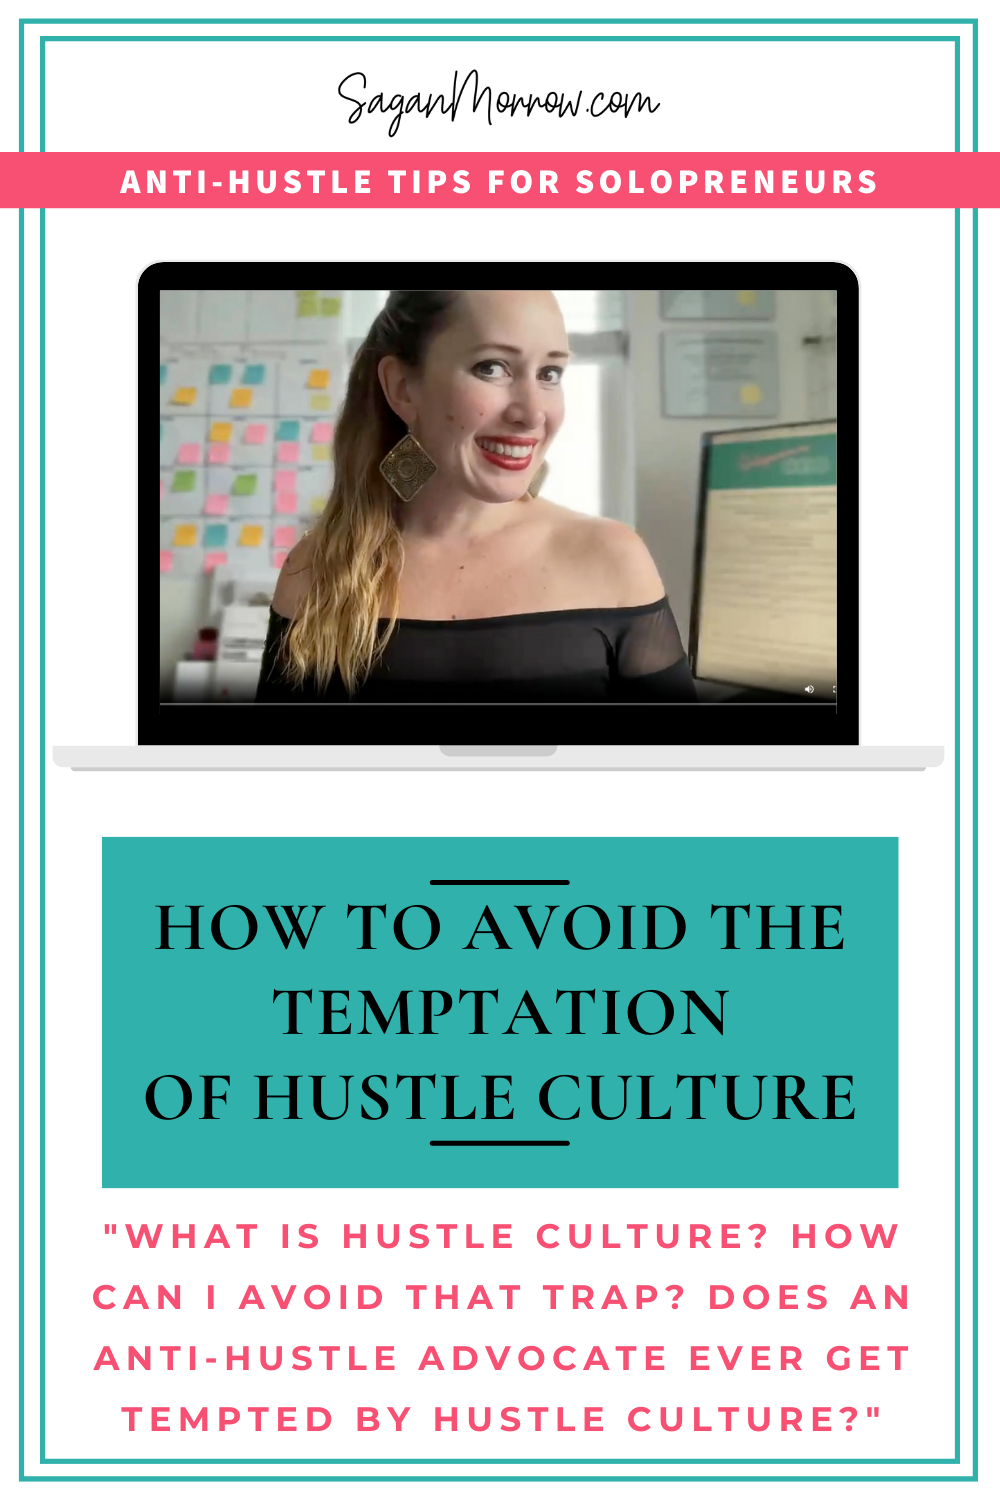 what is hustle culture? Does an anti hustle advocate ever get tempted by hustle culture